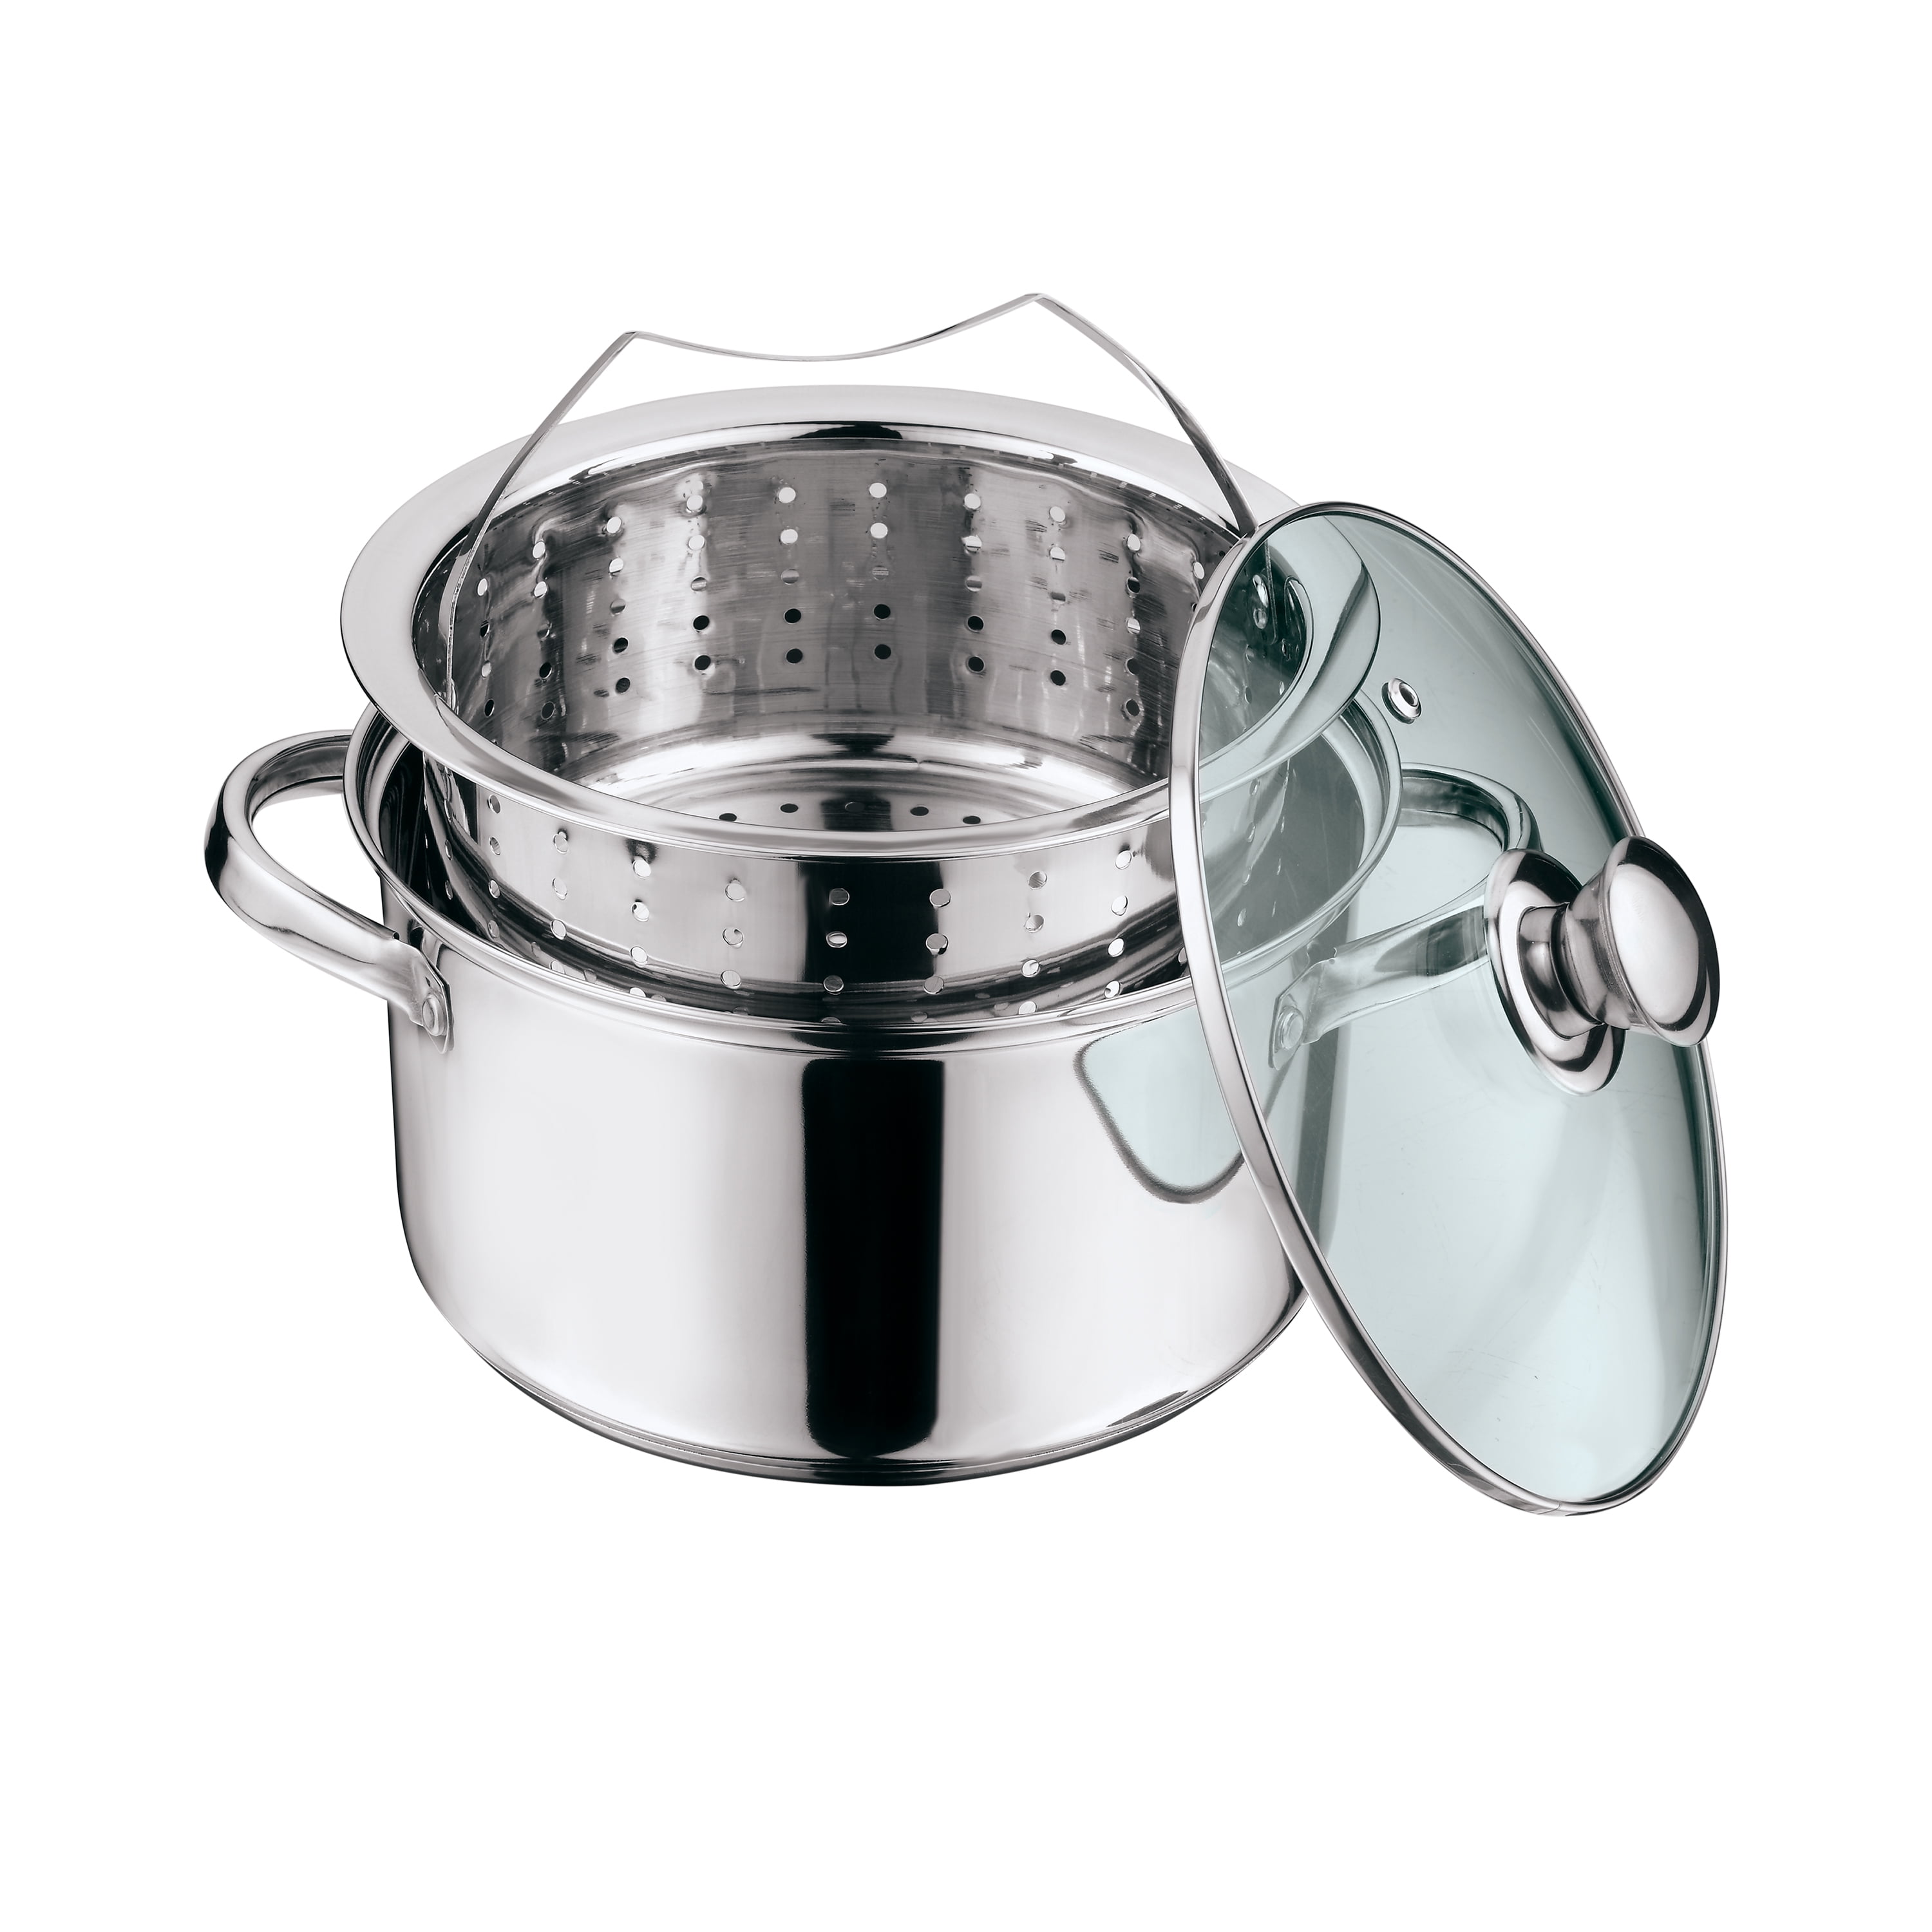 Stainless Steel Pot With Steamer Insert